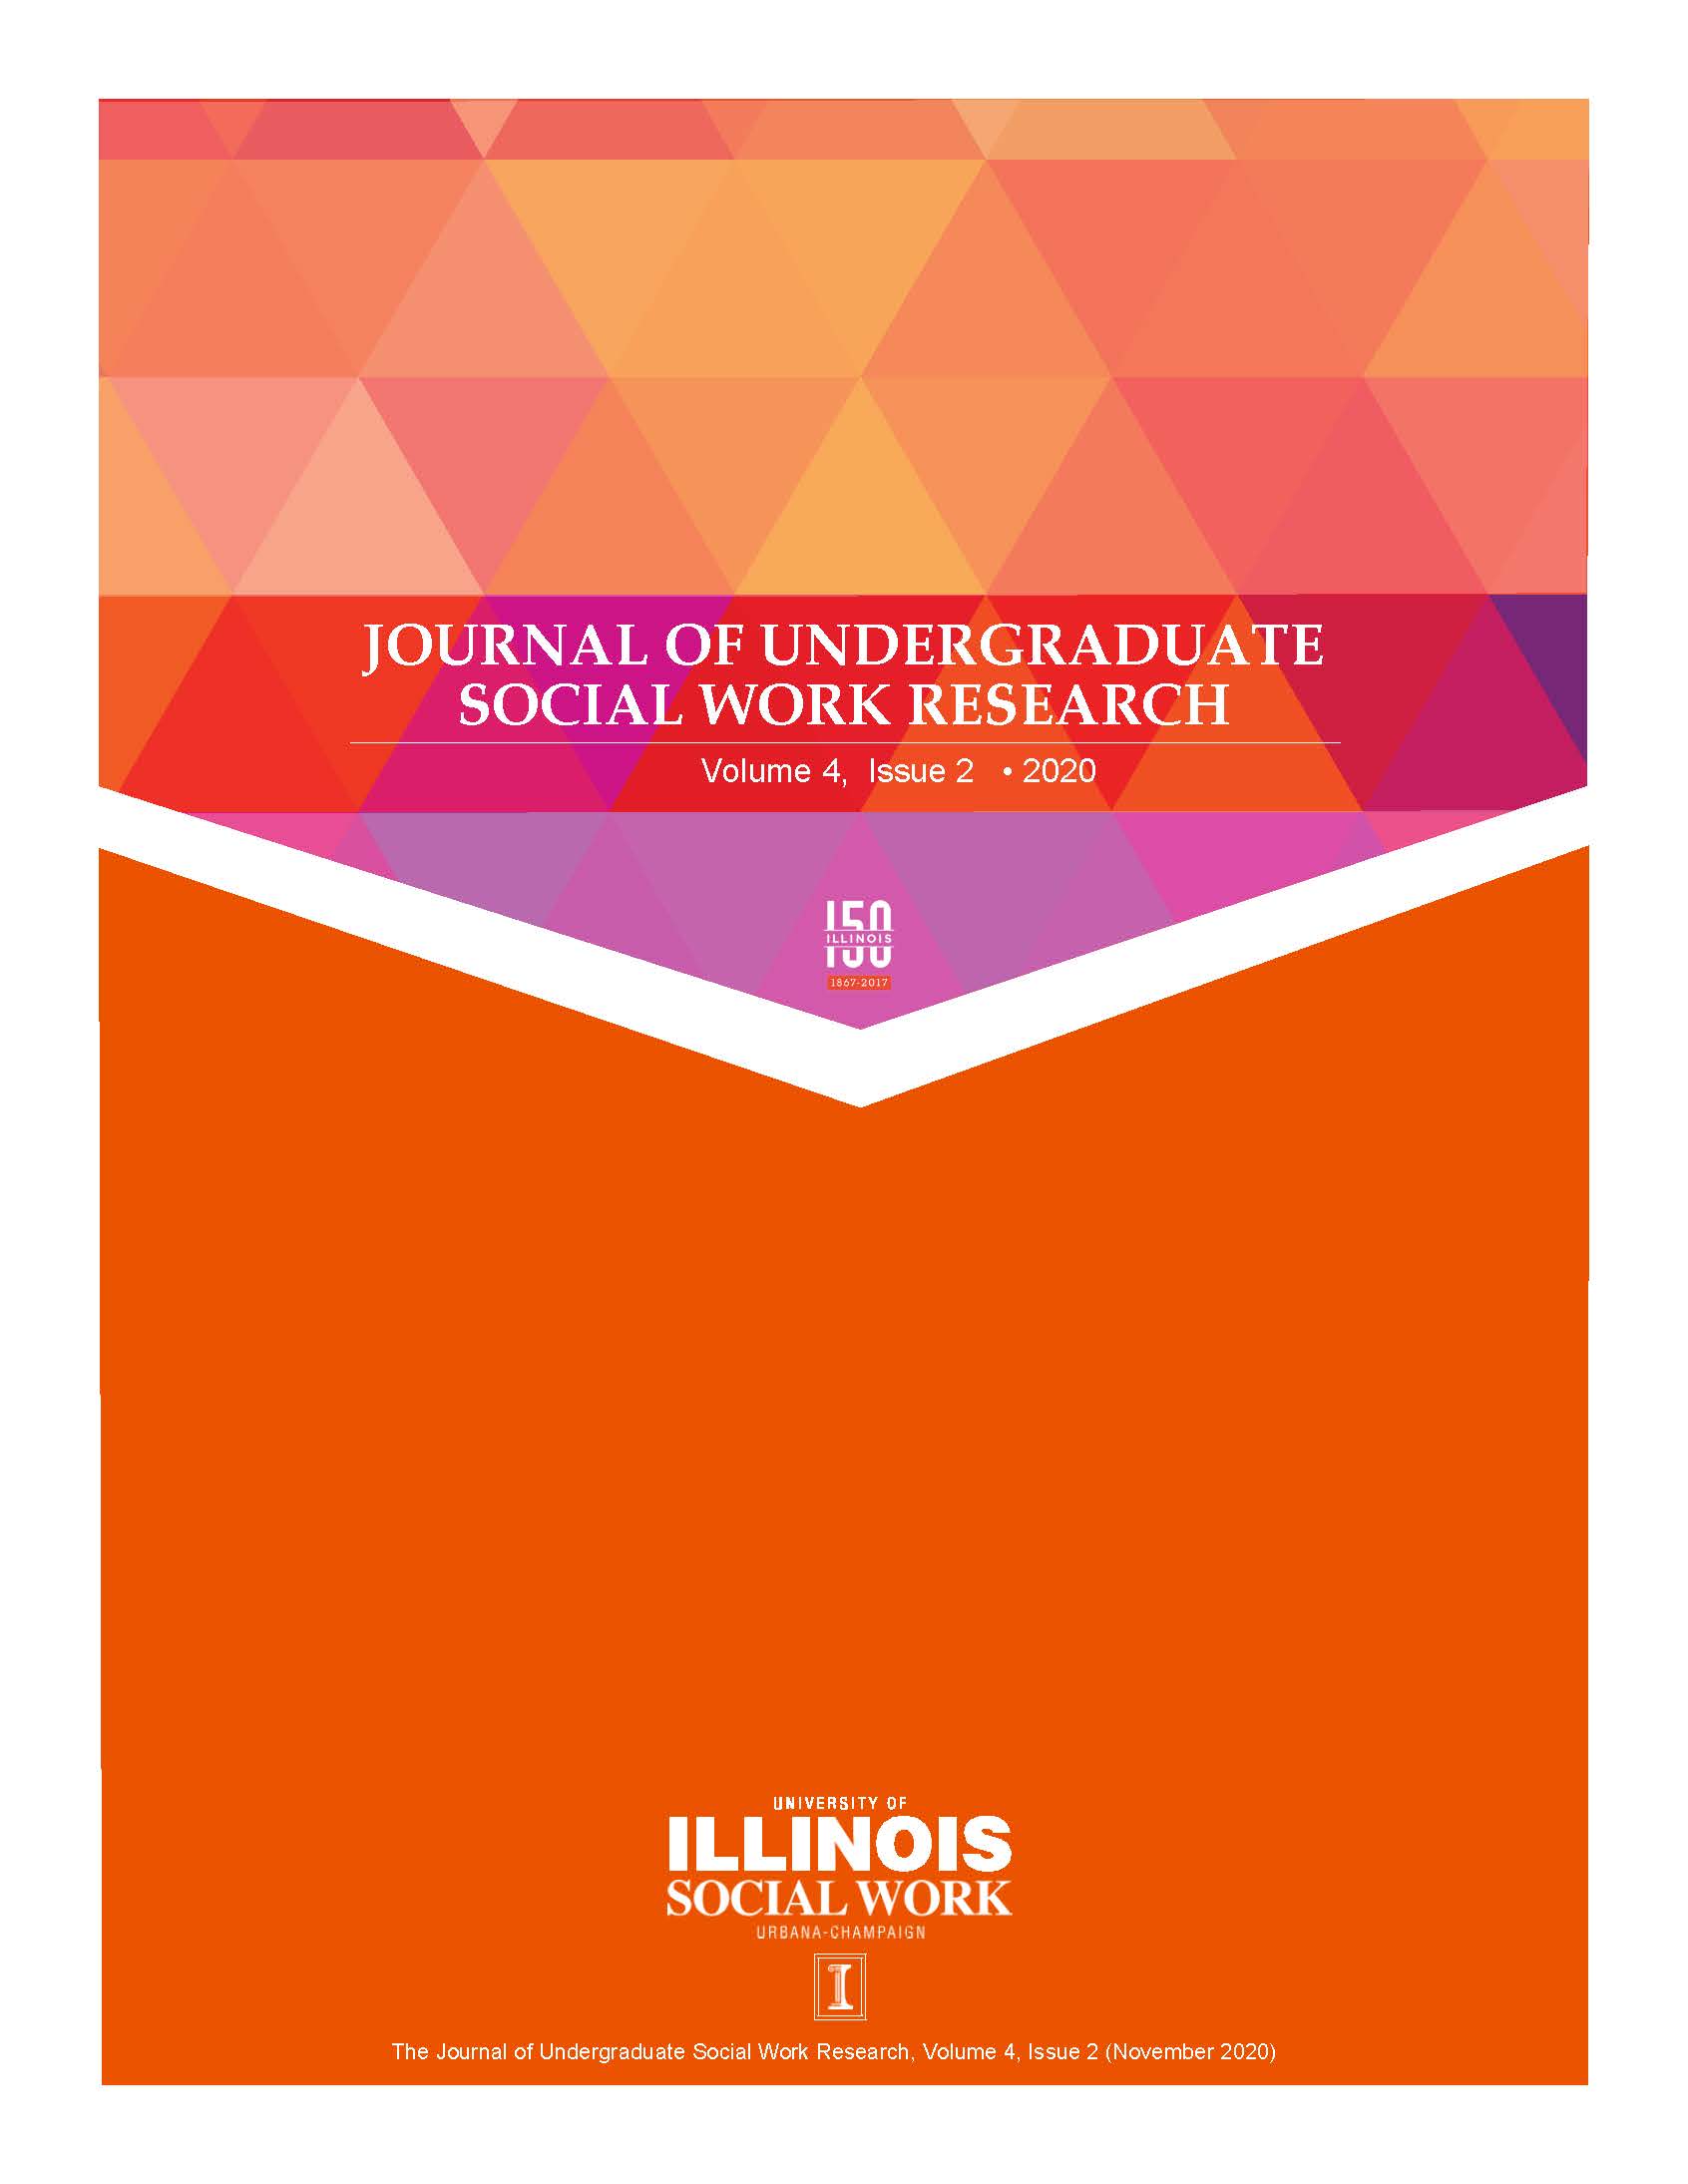 Journal of Undergraduate Social Work Research Vol 4, no. 2 cover with white font on orange background